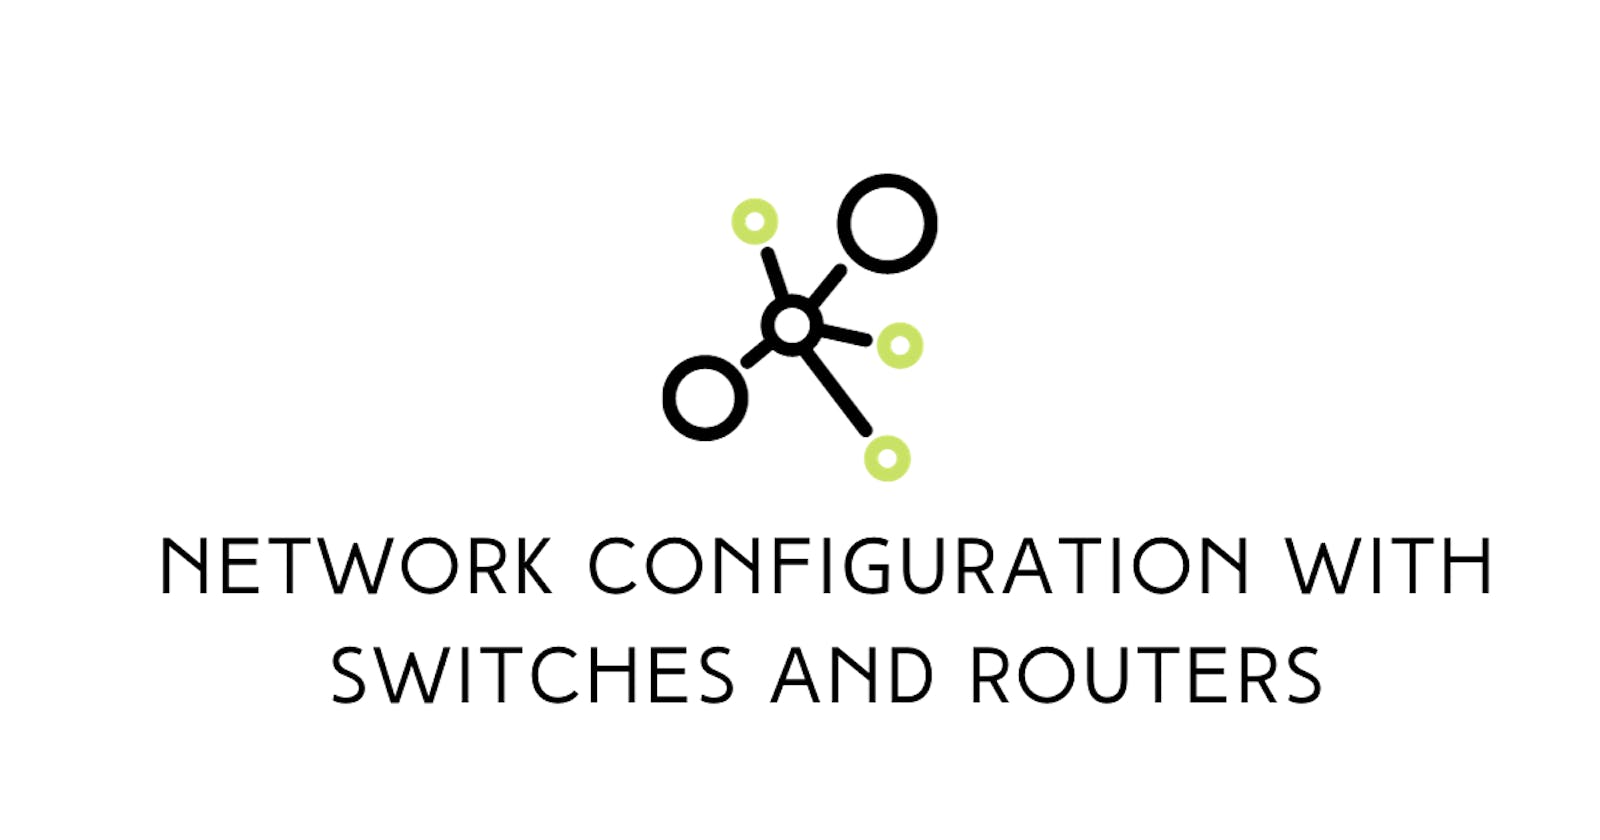 Simple Network Configuration with Switches and Routers